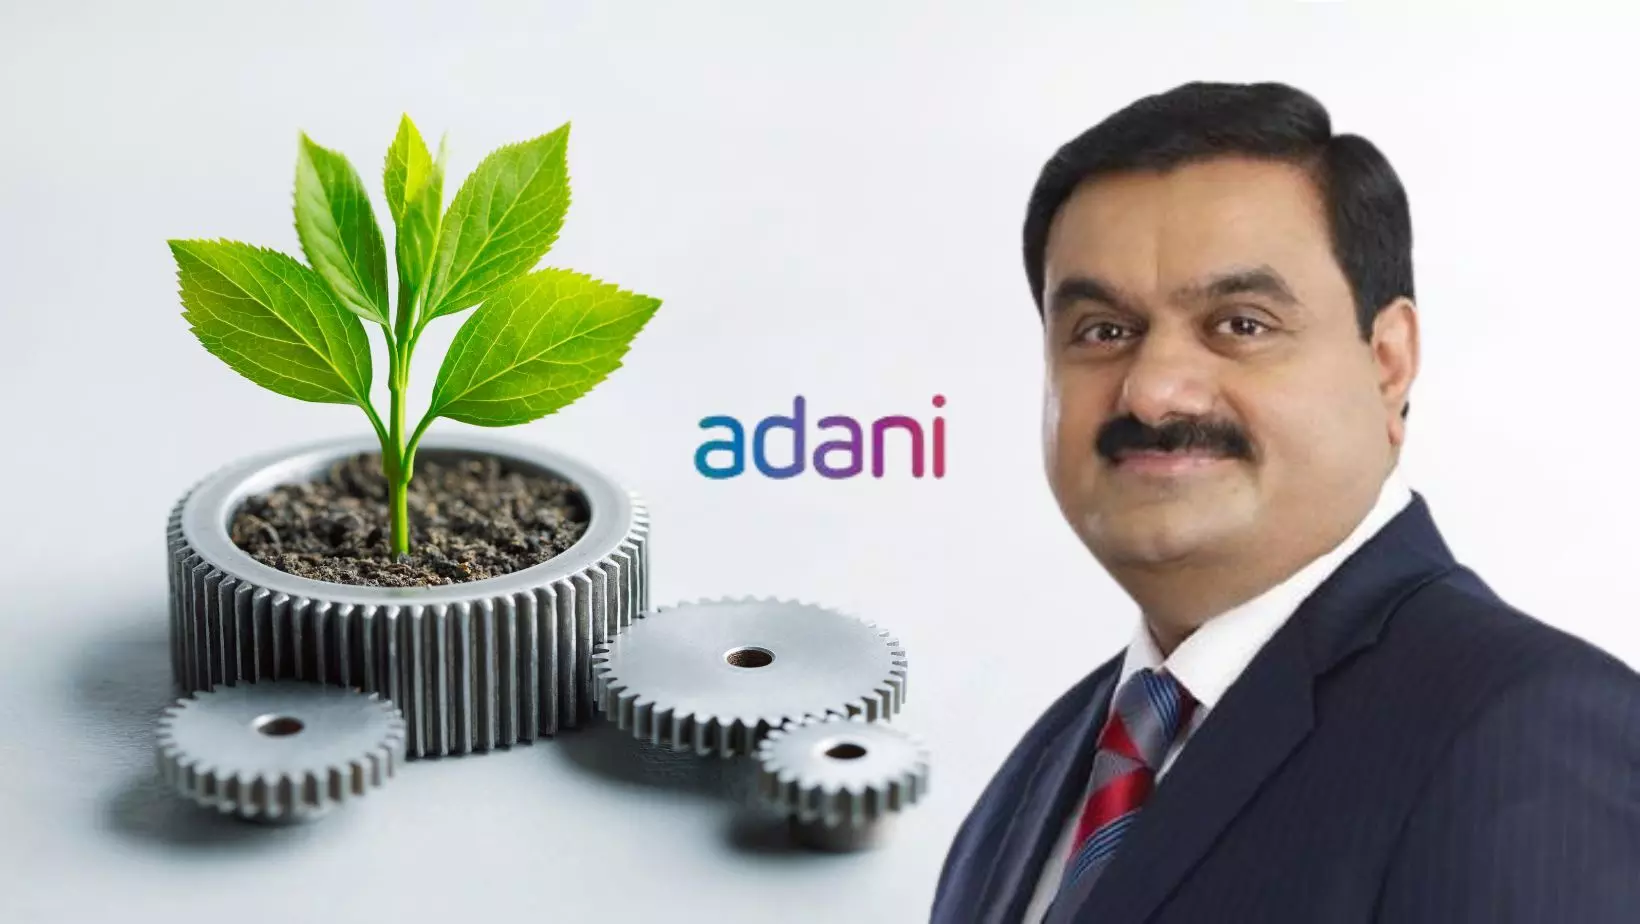 Adani Group to invest Rs 7 lakh crore for green initiatives